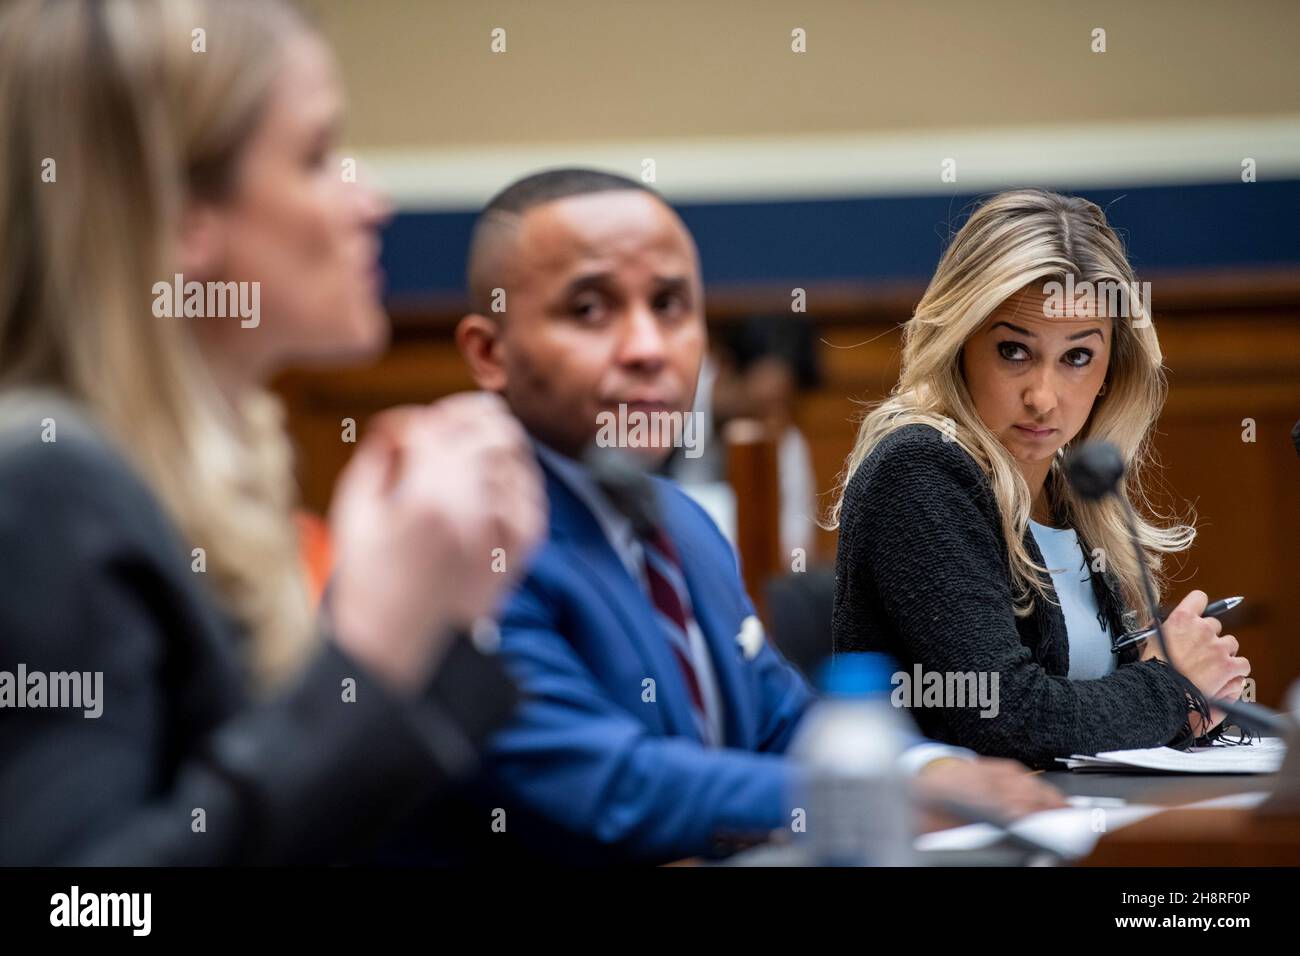 Kara Frederick, Research Fellow in Technology Policy, The Heritage Foundation, right, and Rashad Robinson, President, Color of Change, center, listen while Frances Haugen, Former Facebook Employee, left, responds to questions during a House Committee on Energy and Commerce | Subcommittee on Communications and Technology hearing “Holding Big Tech Accountable: Targeted Reforms to Techs Legal Immunity” in the Rayburn House Office Building in Washington, DC, Wednesday, December 1, 2021. Credit: Rod Lamkey/CNP/Sipa USA Stock Photo